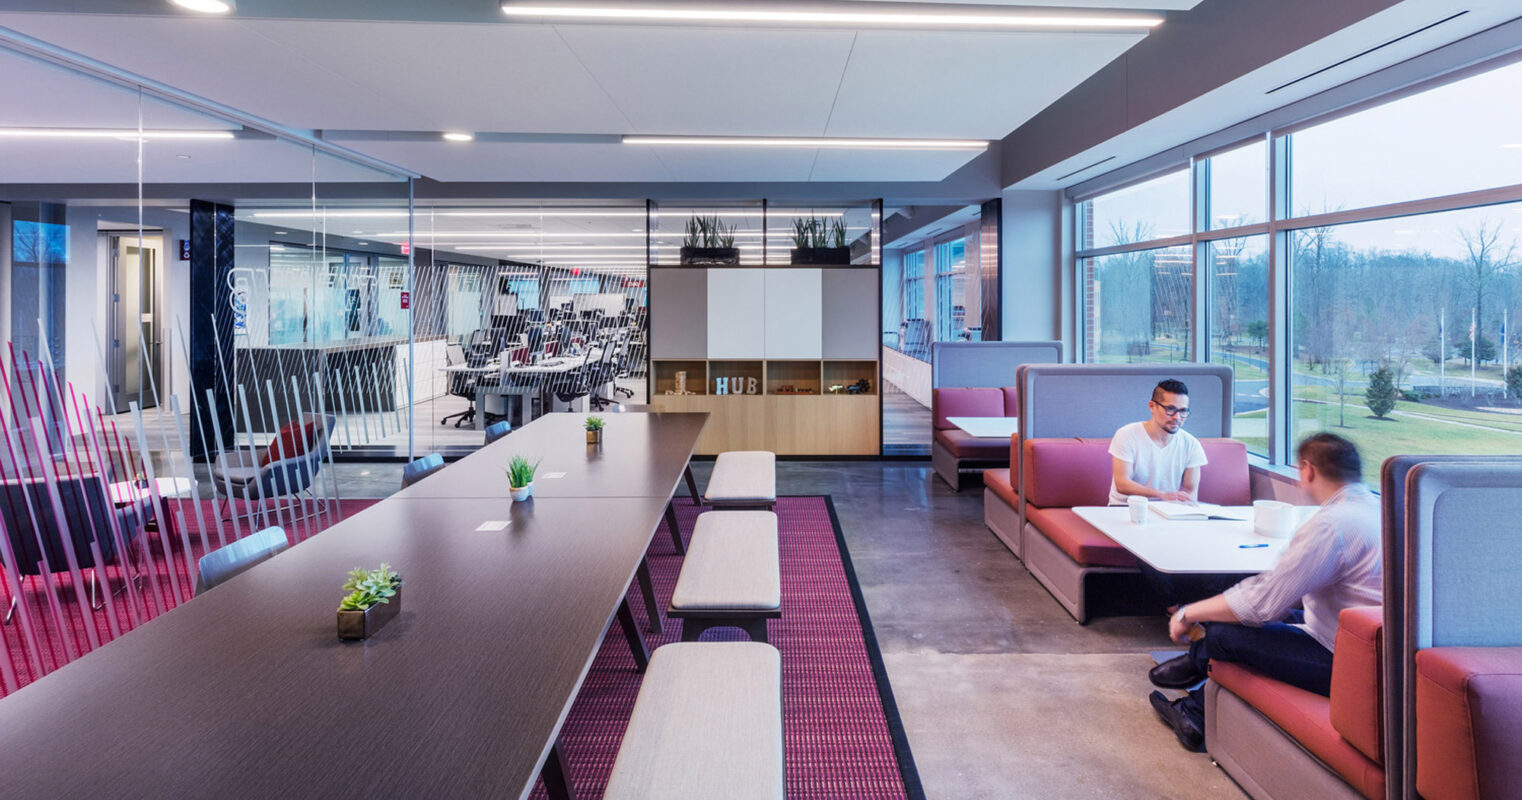 Open-plan office with ample natural light featuring modern furniture, including communal desks and private booth seating with geometric acoustical panels for sound absorption. The color scheme blends neutral tones with vibrant seating upholstery, enhancing the space's dynamic and collaborative atmosphere.